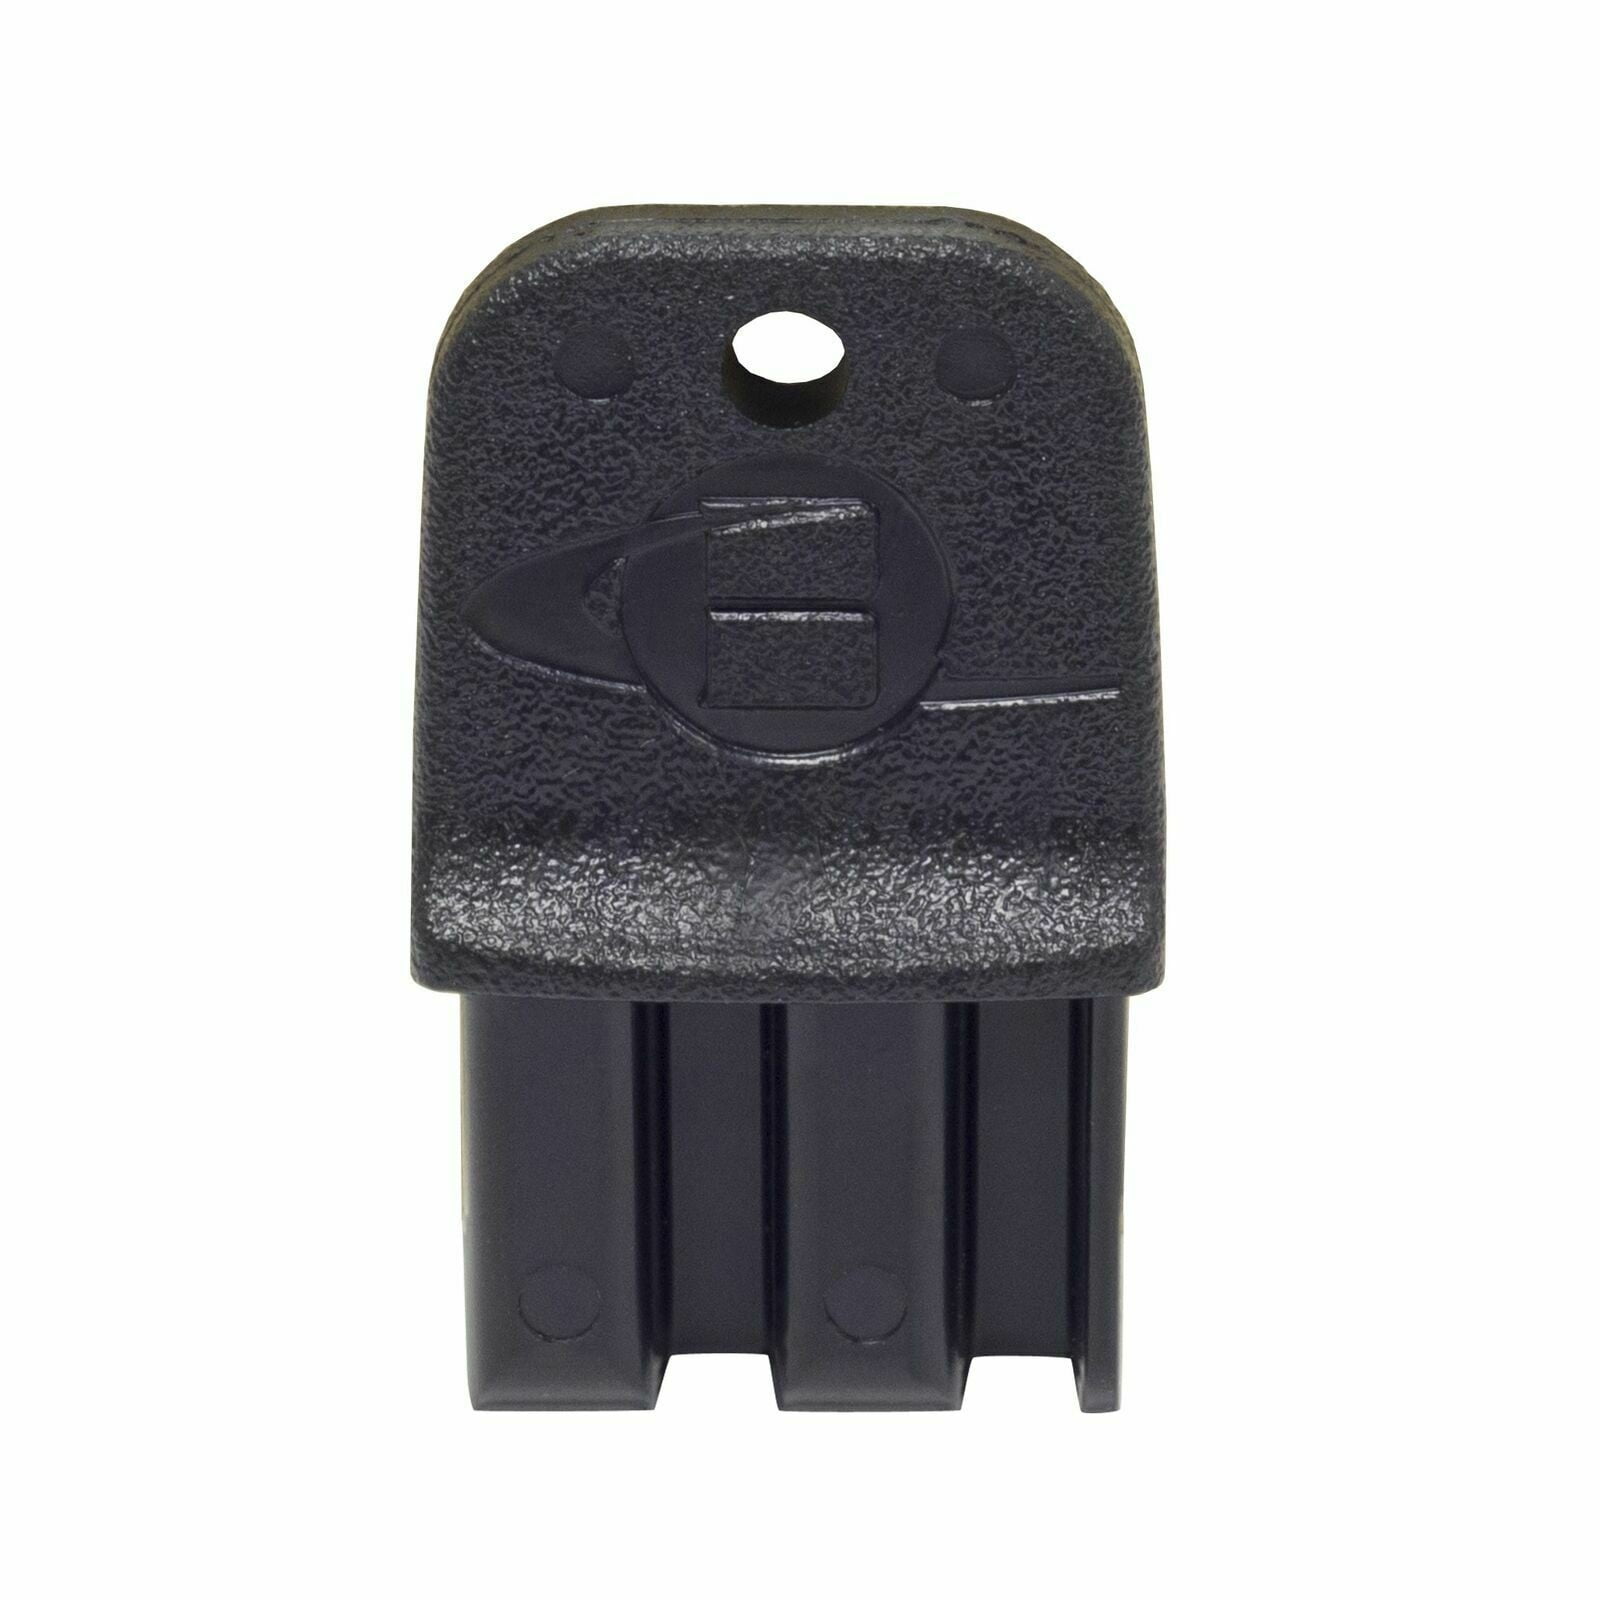 Protecta EVO Plastic PM Replacement Key For Bait Stations - 1 Key by Bell  Laboratories